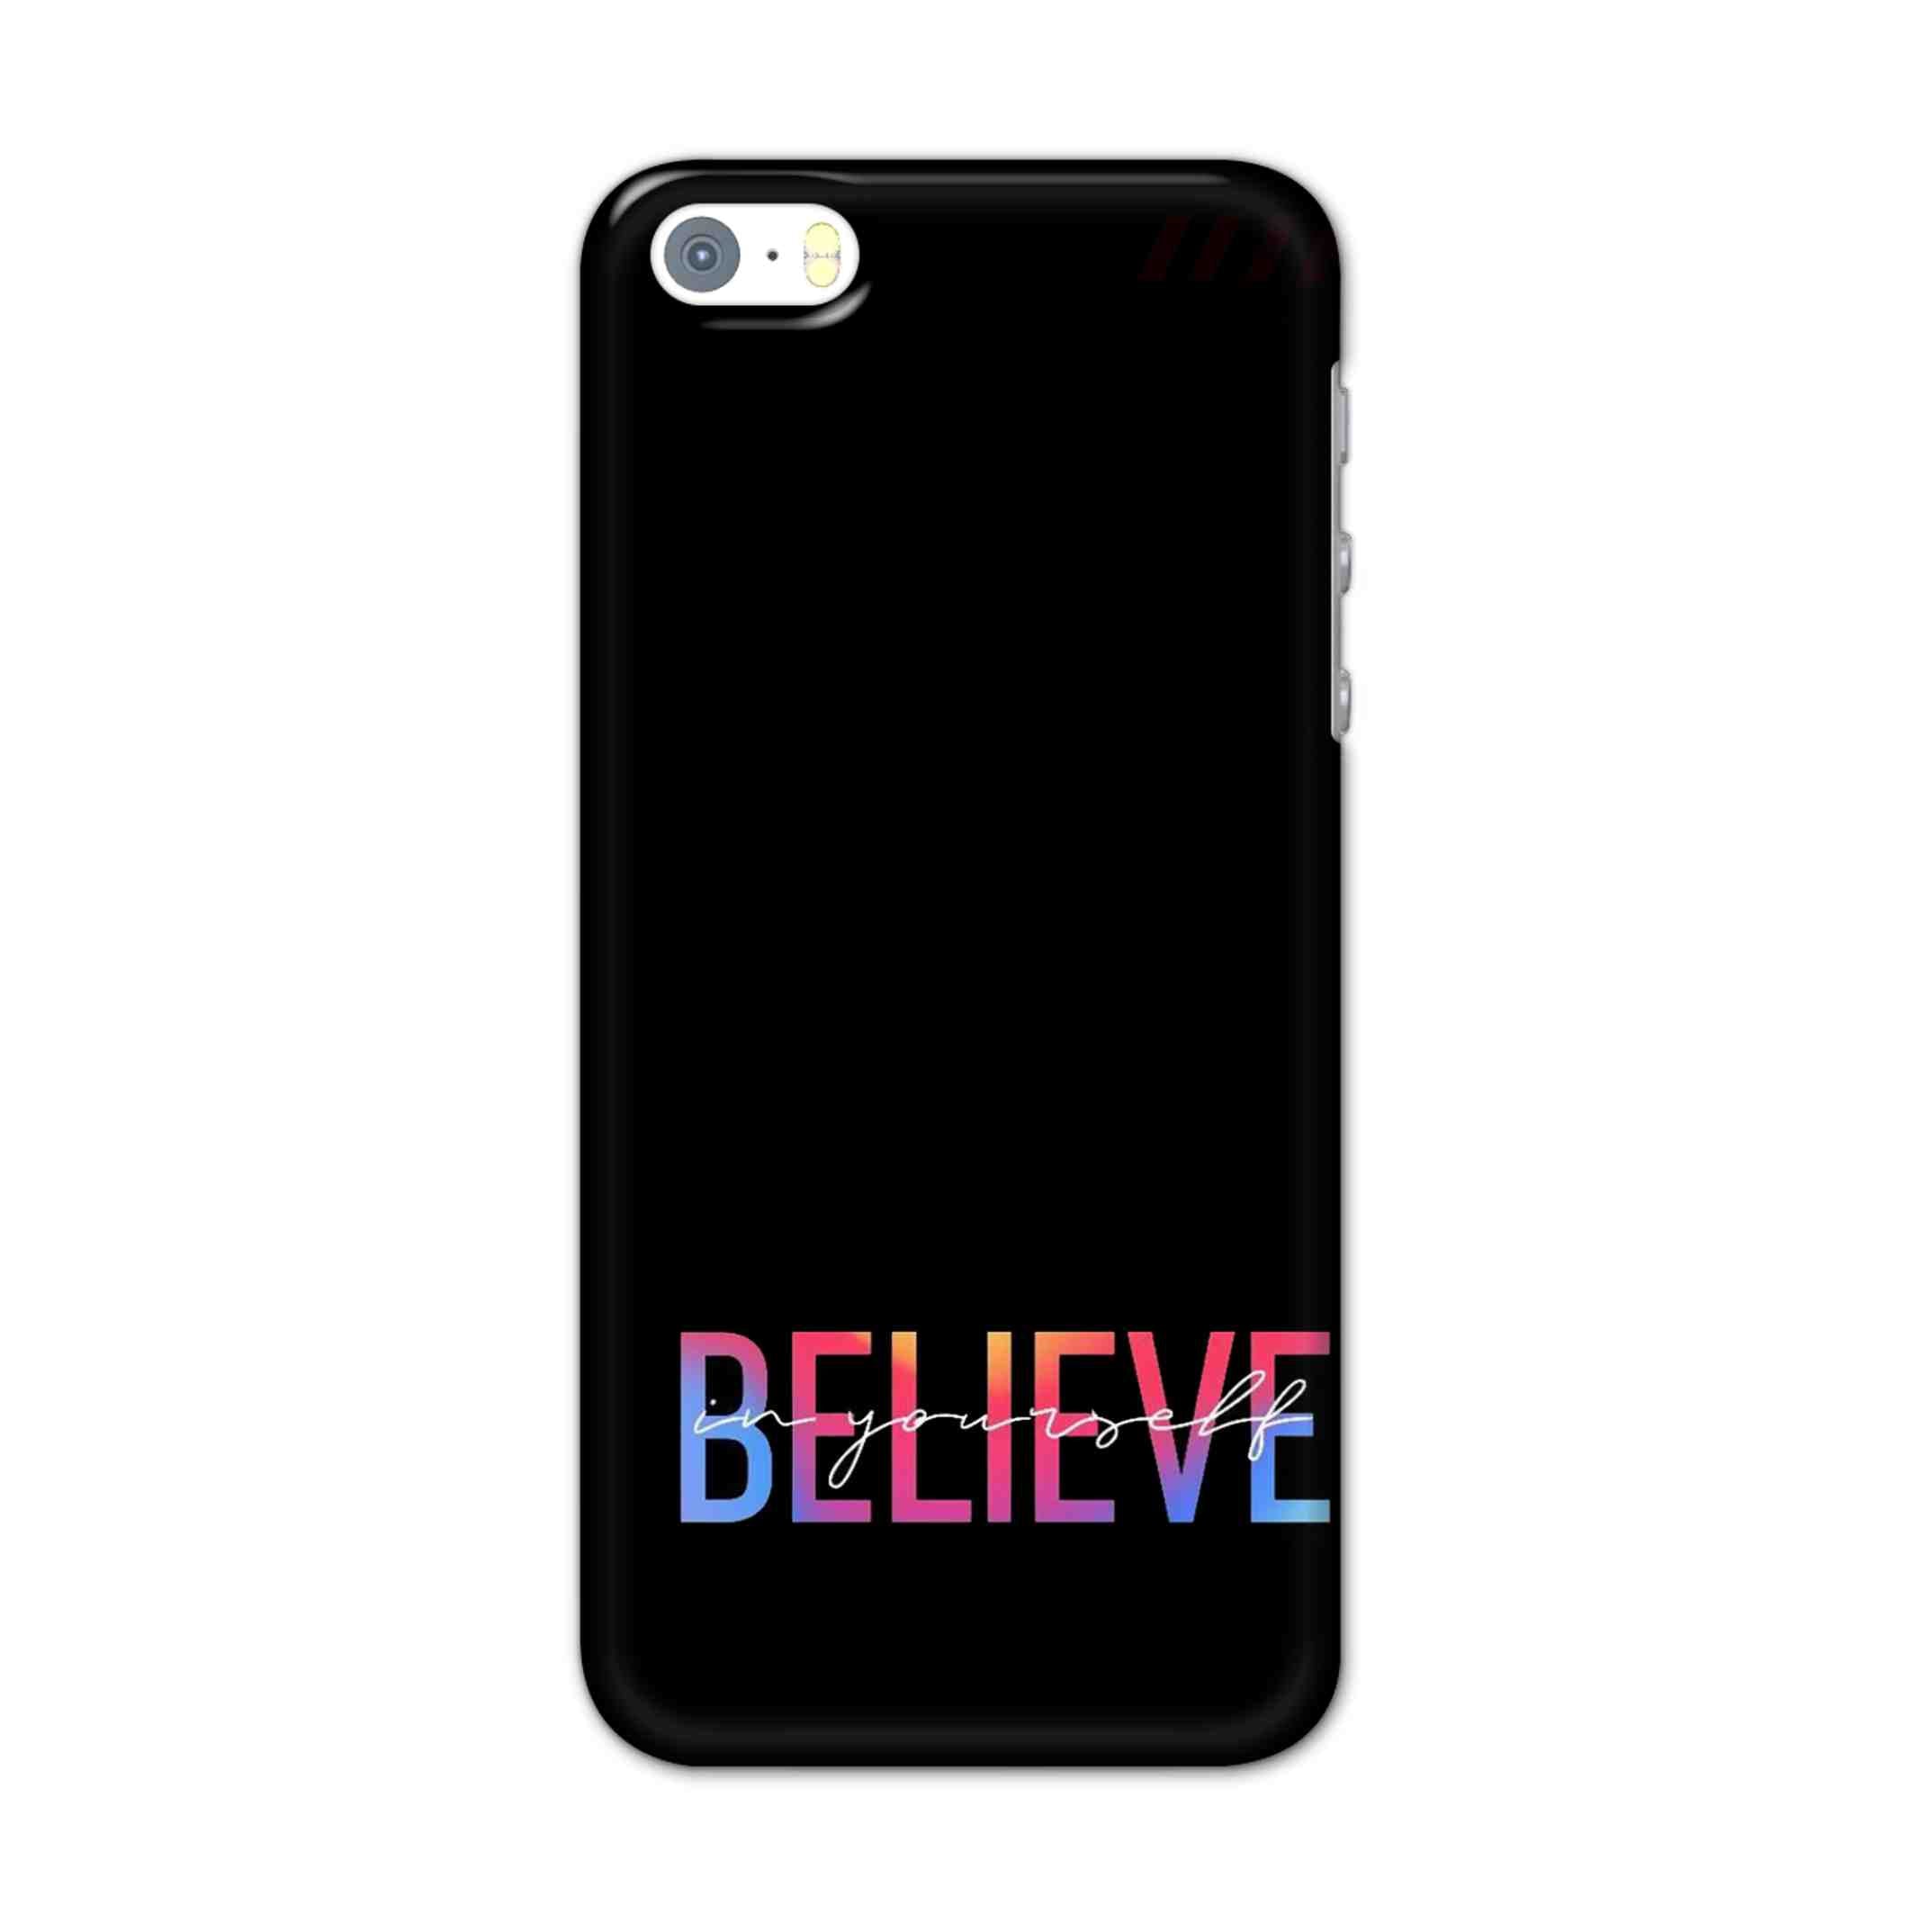 Buy Believe Hard Back Mobile Phone Case/Cover For Apple Iphone SE Online